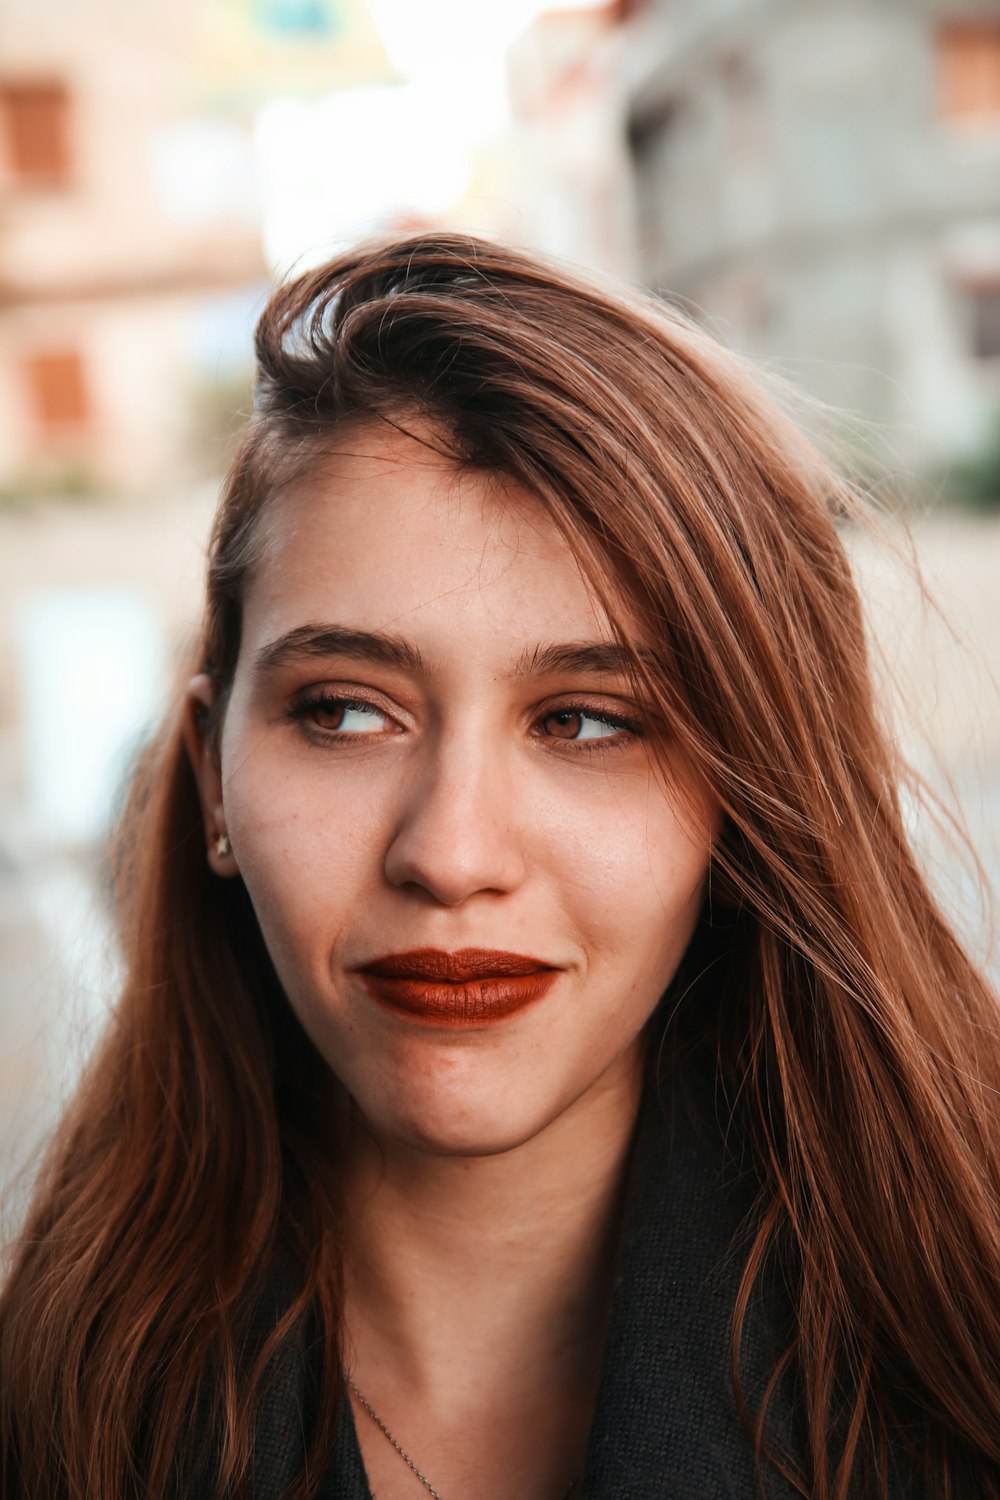 portrait photography of woman wearing red lipstick